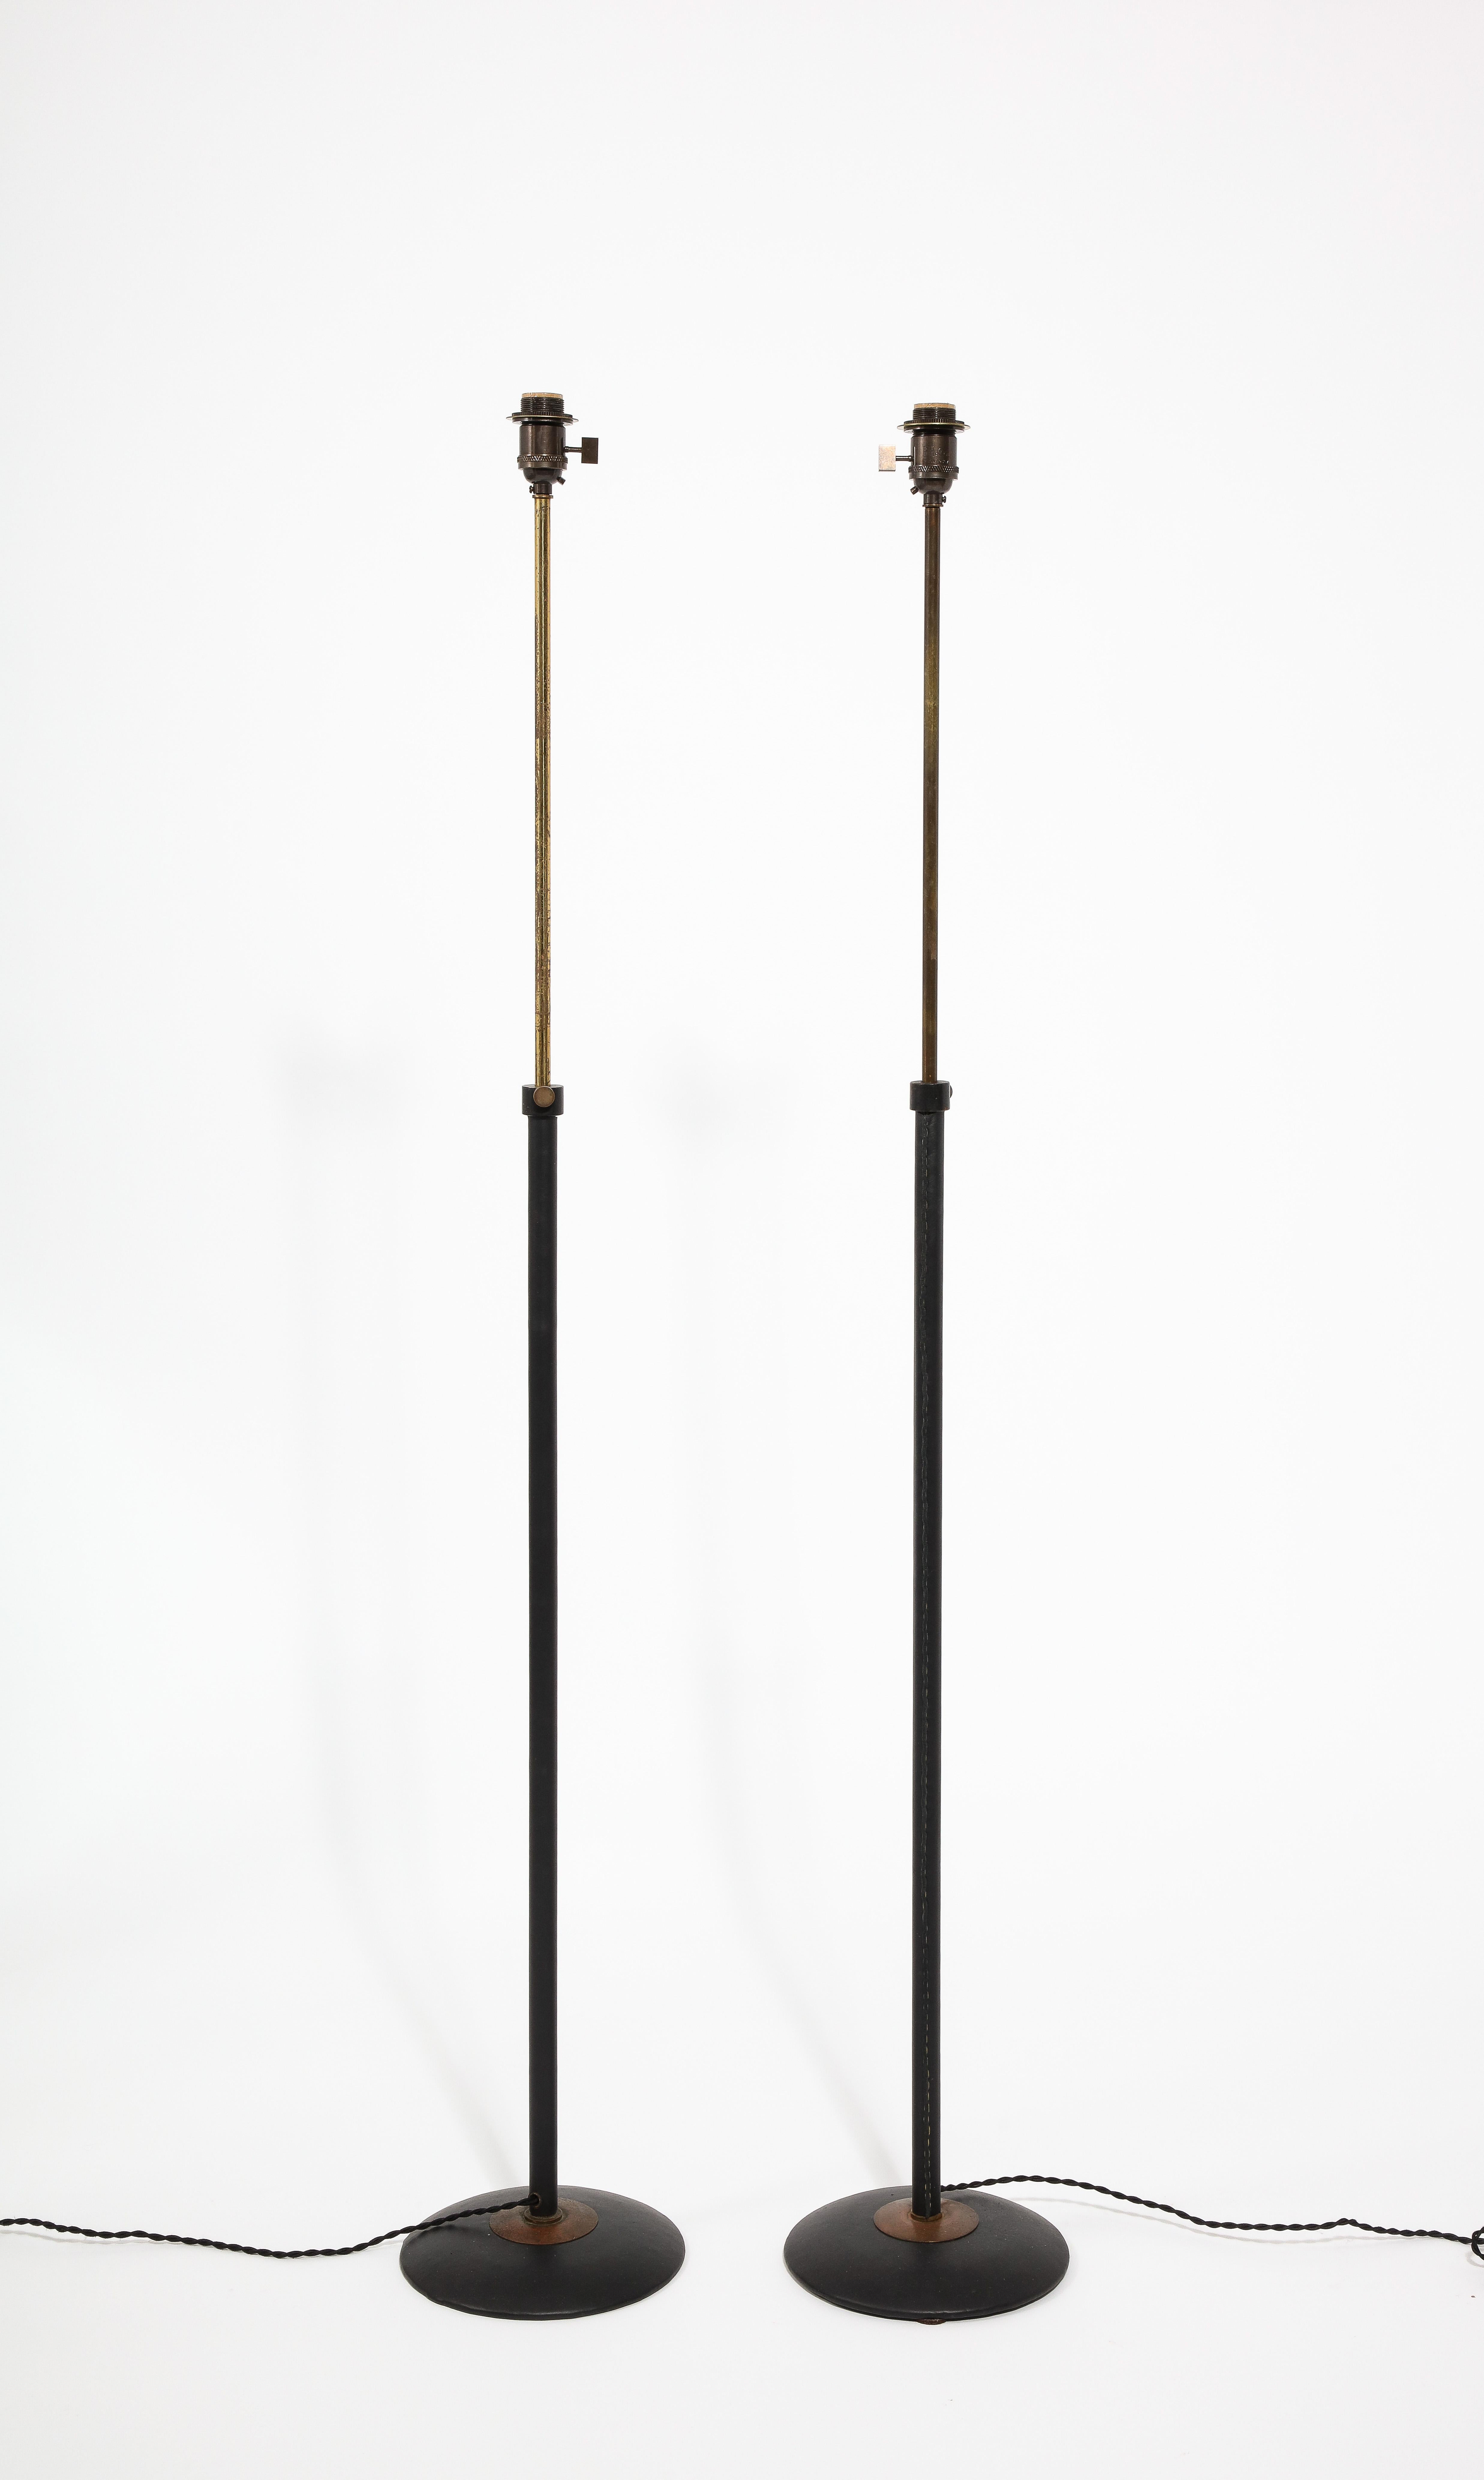 Elegant pair of telescopic floor lamps wrapped in black leather. Rewired. Shades are available on request.